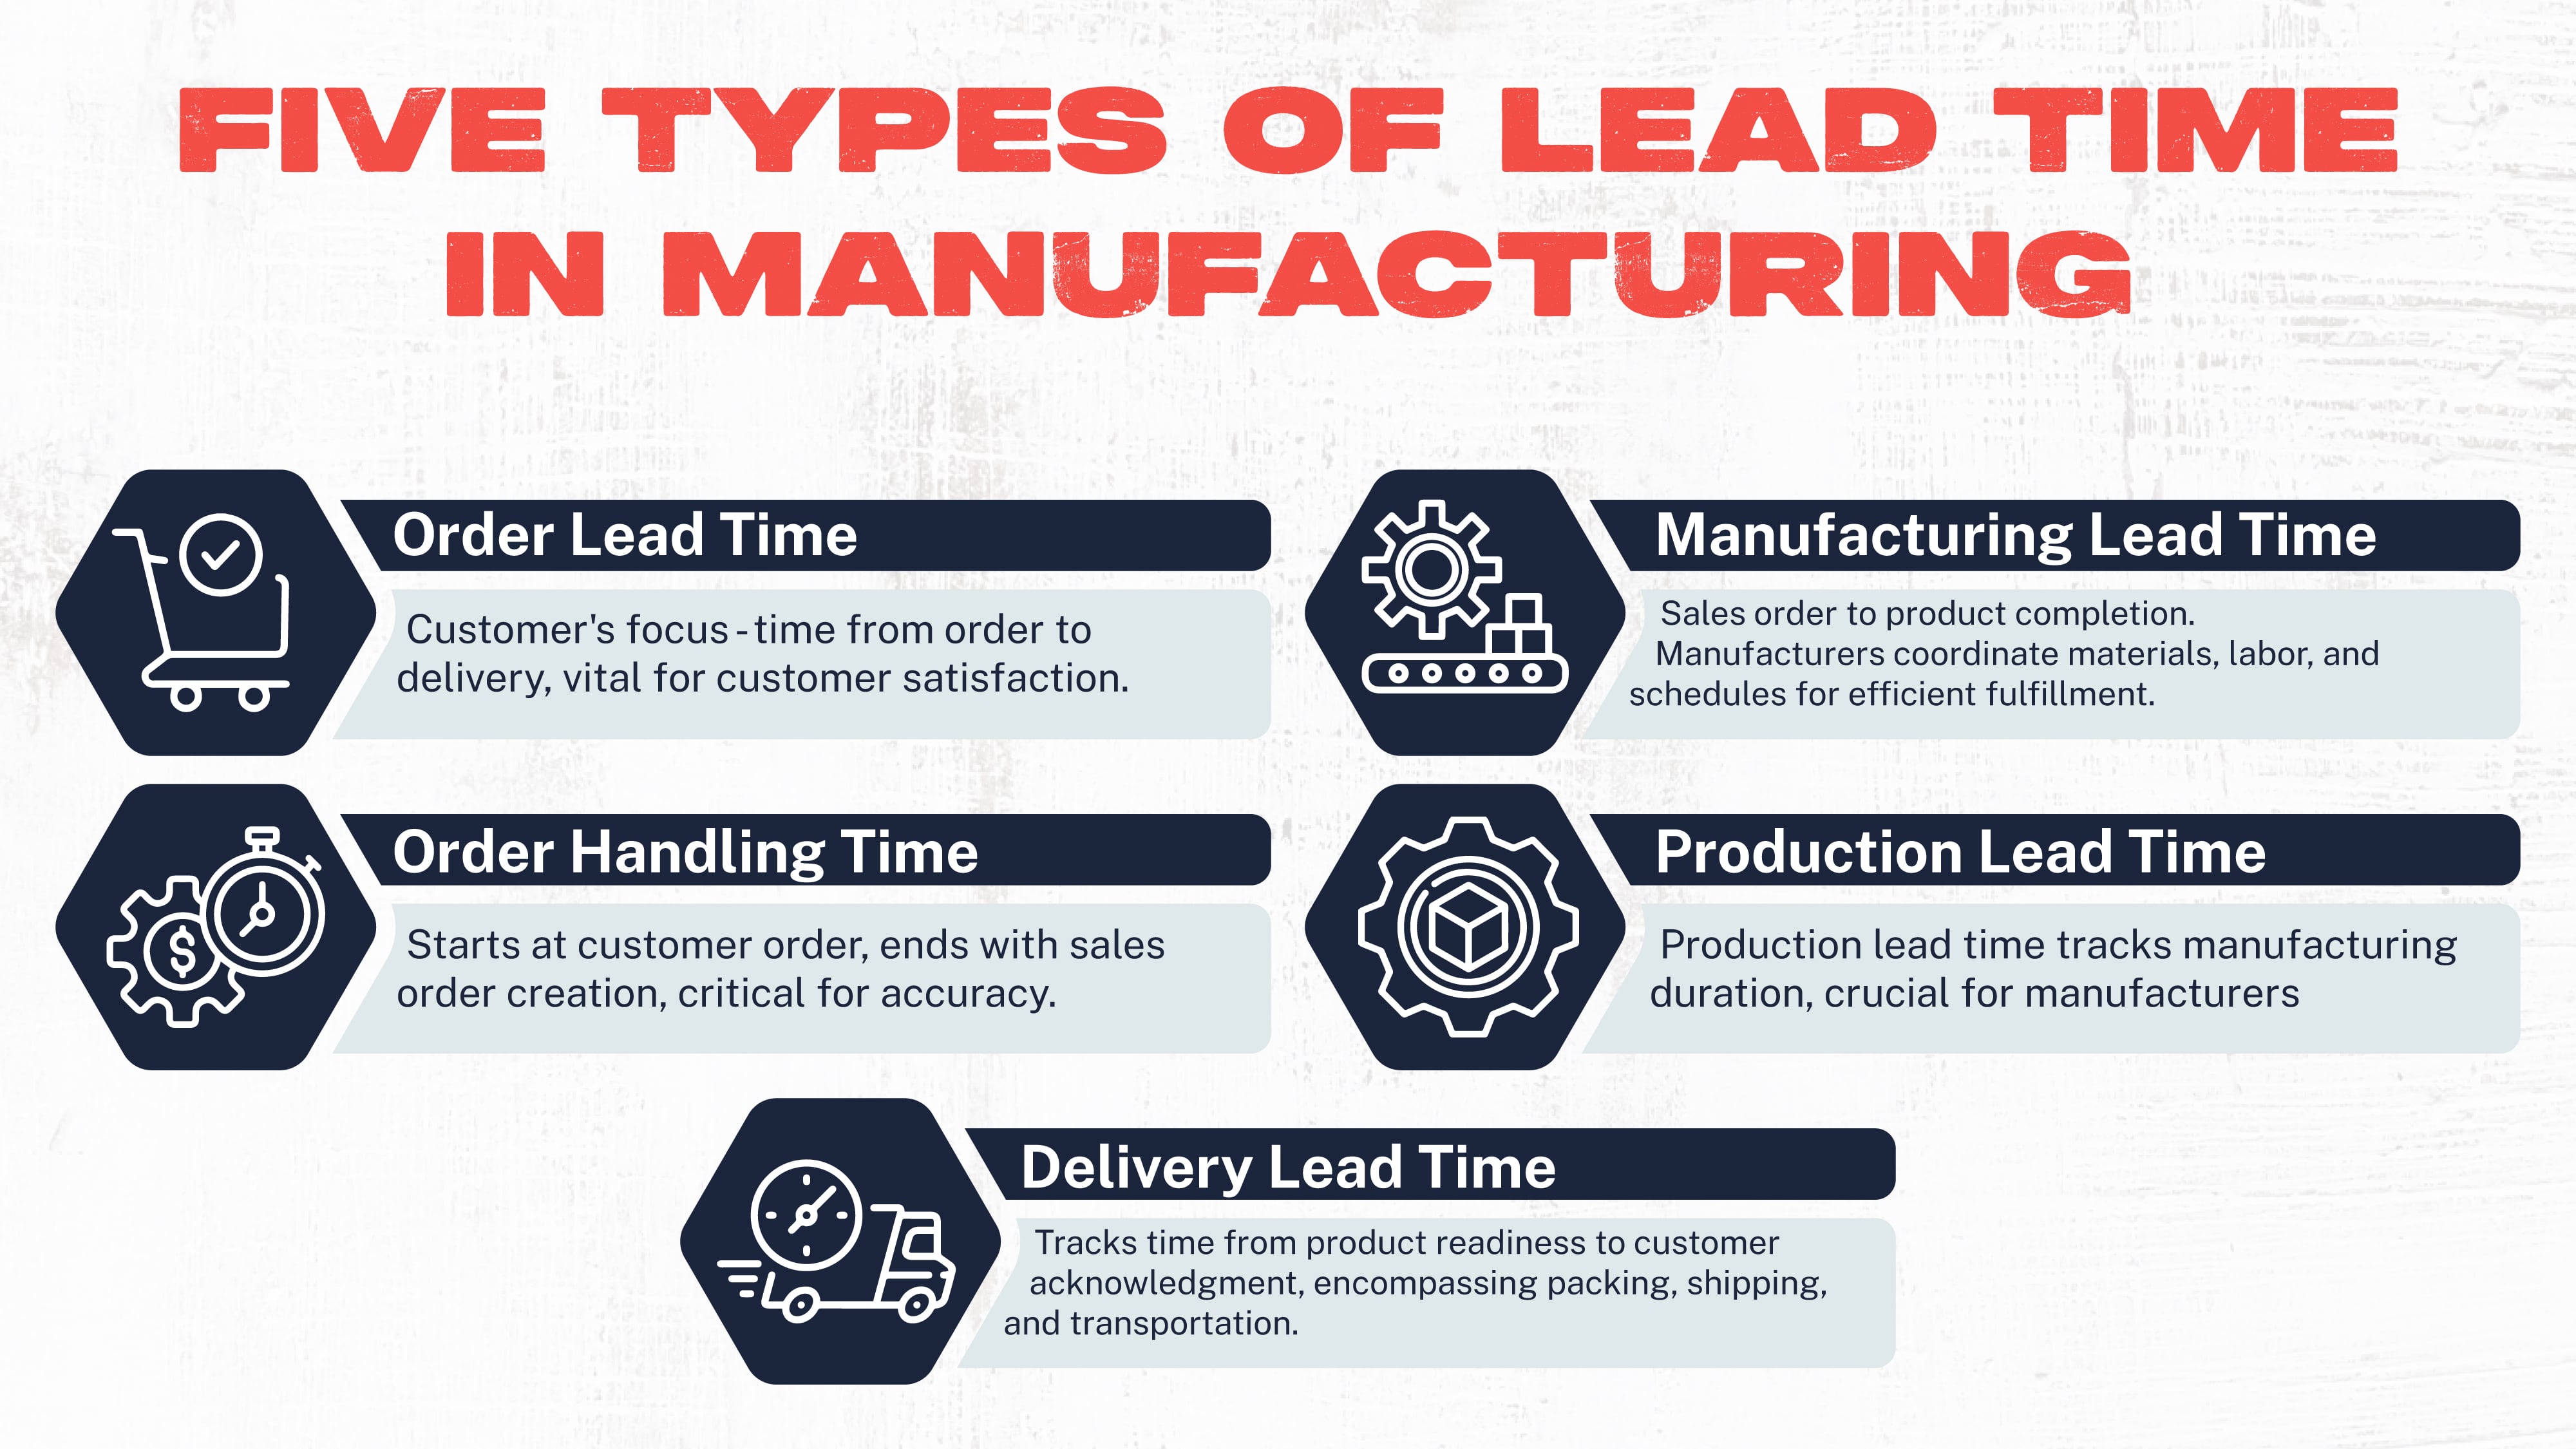 2 Five Types of Lead Time in Manufacturing